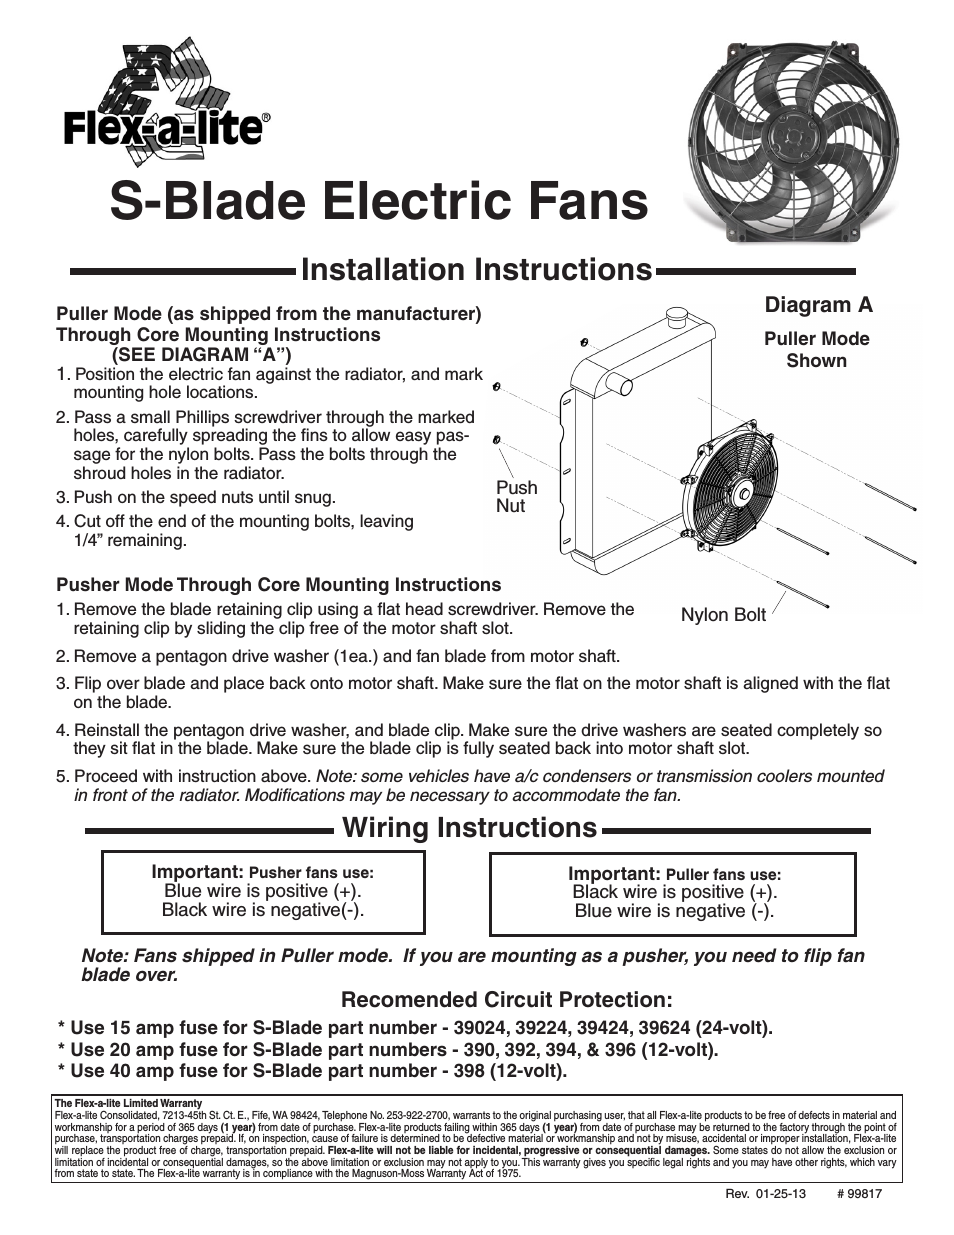 S-Blade Electric Fans